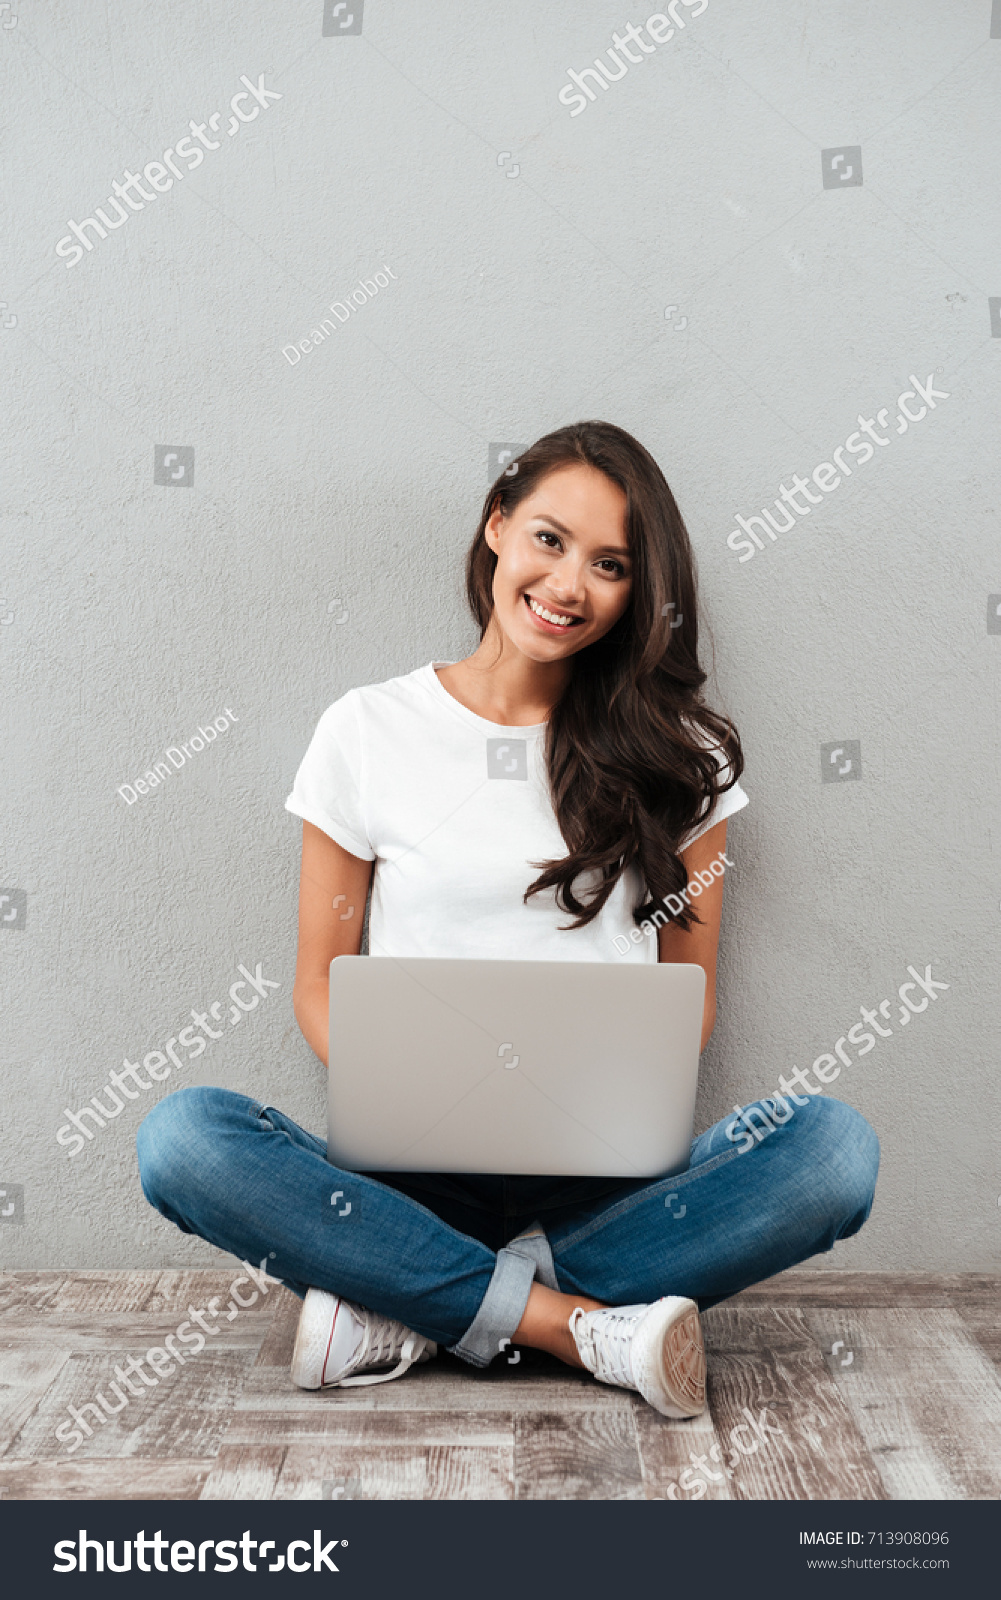 Happy young asian woman working on laptop computer while sitting on the floor with legs crossed isolated over gray background #713908096